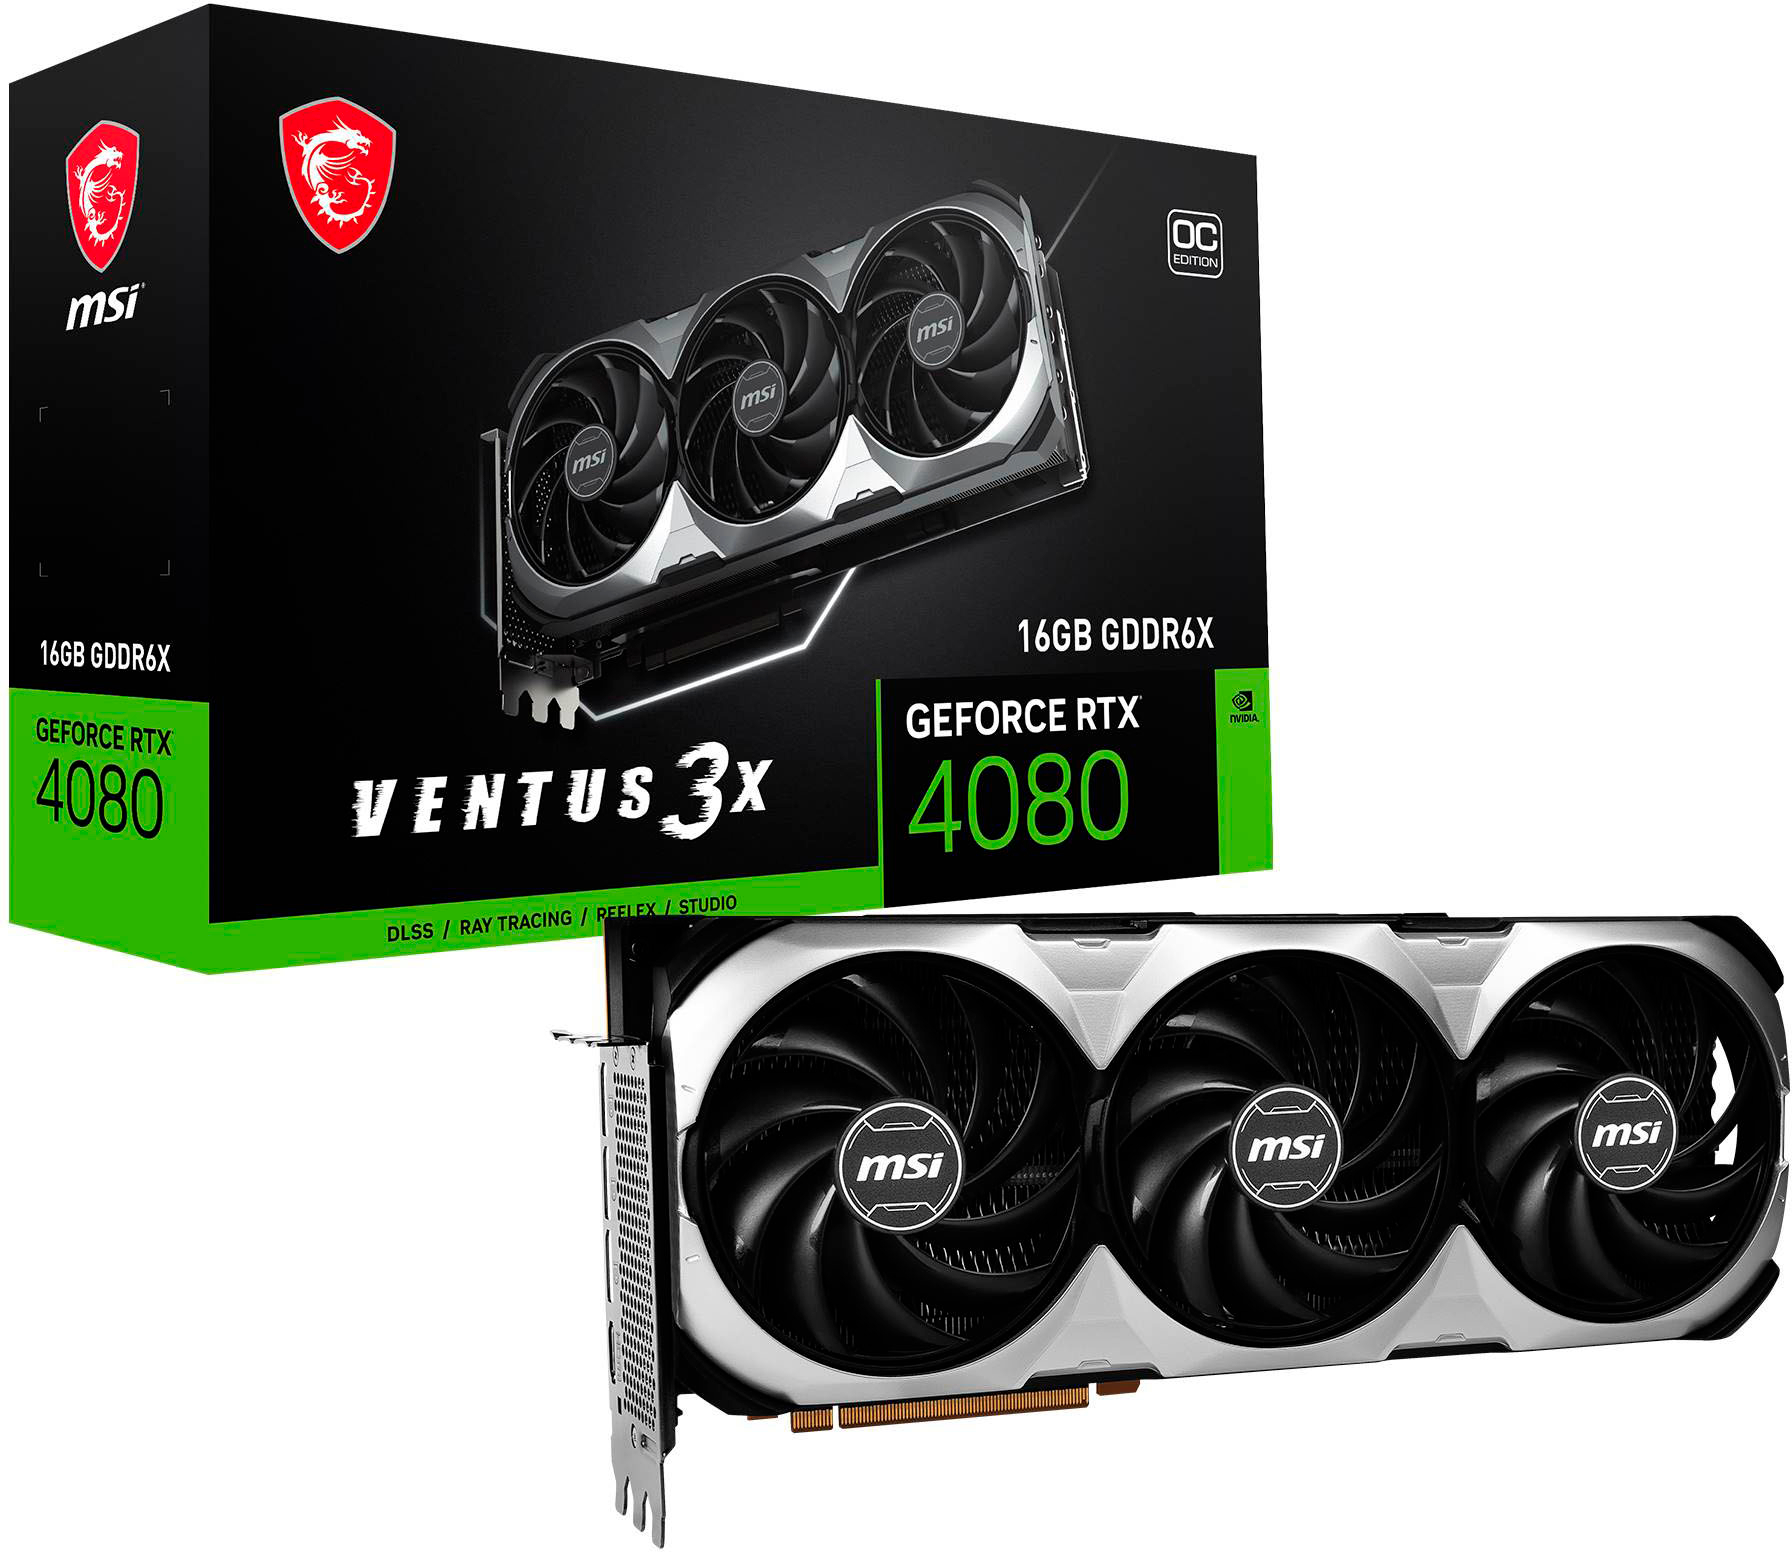 Questions and Answers: MSI NVIDIA GeForce RTX 4080 16GB VENTUS 3X OC